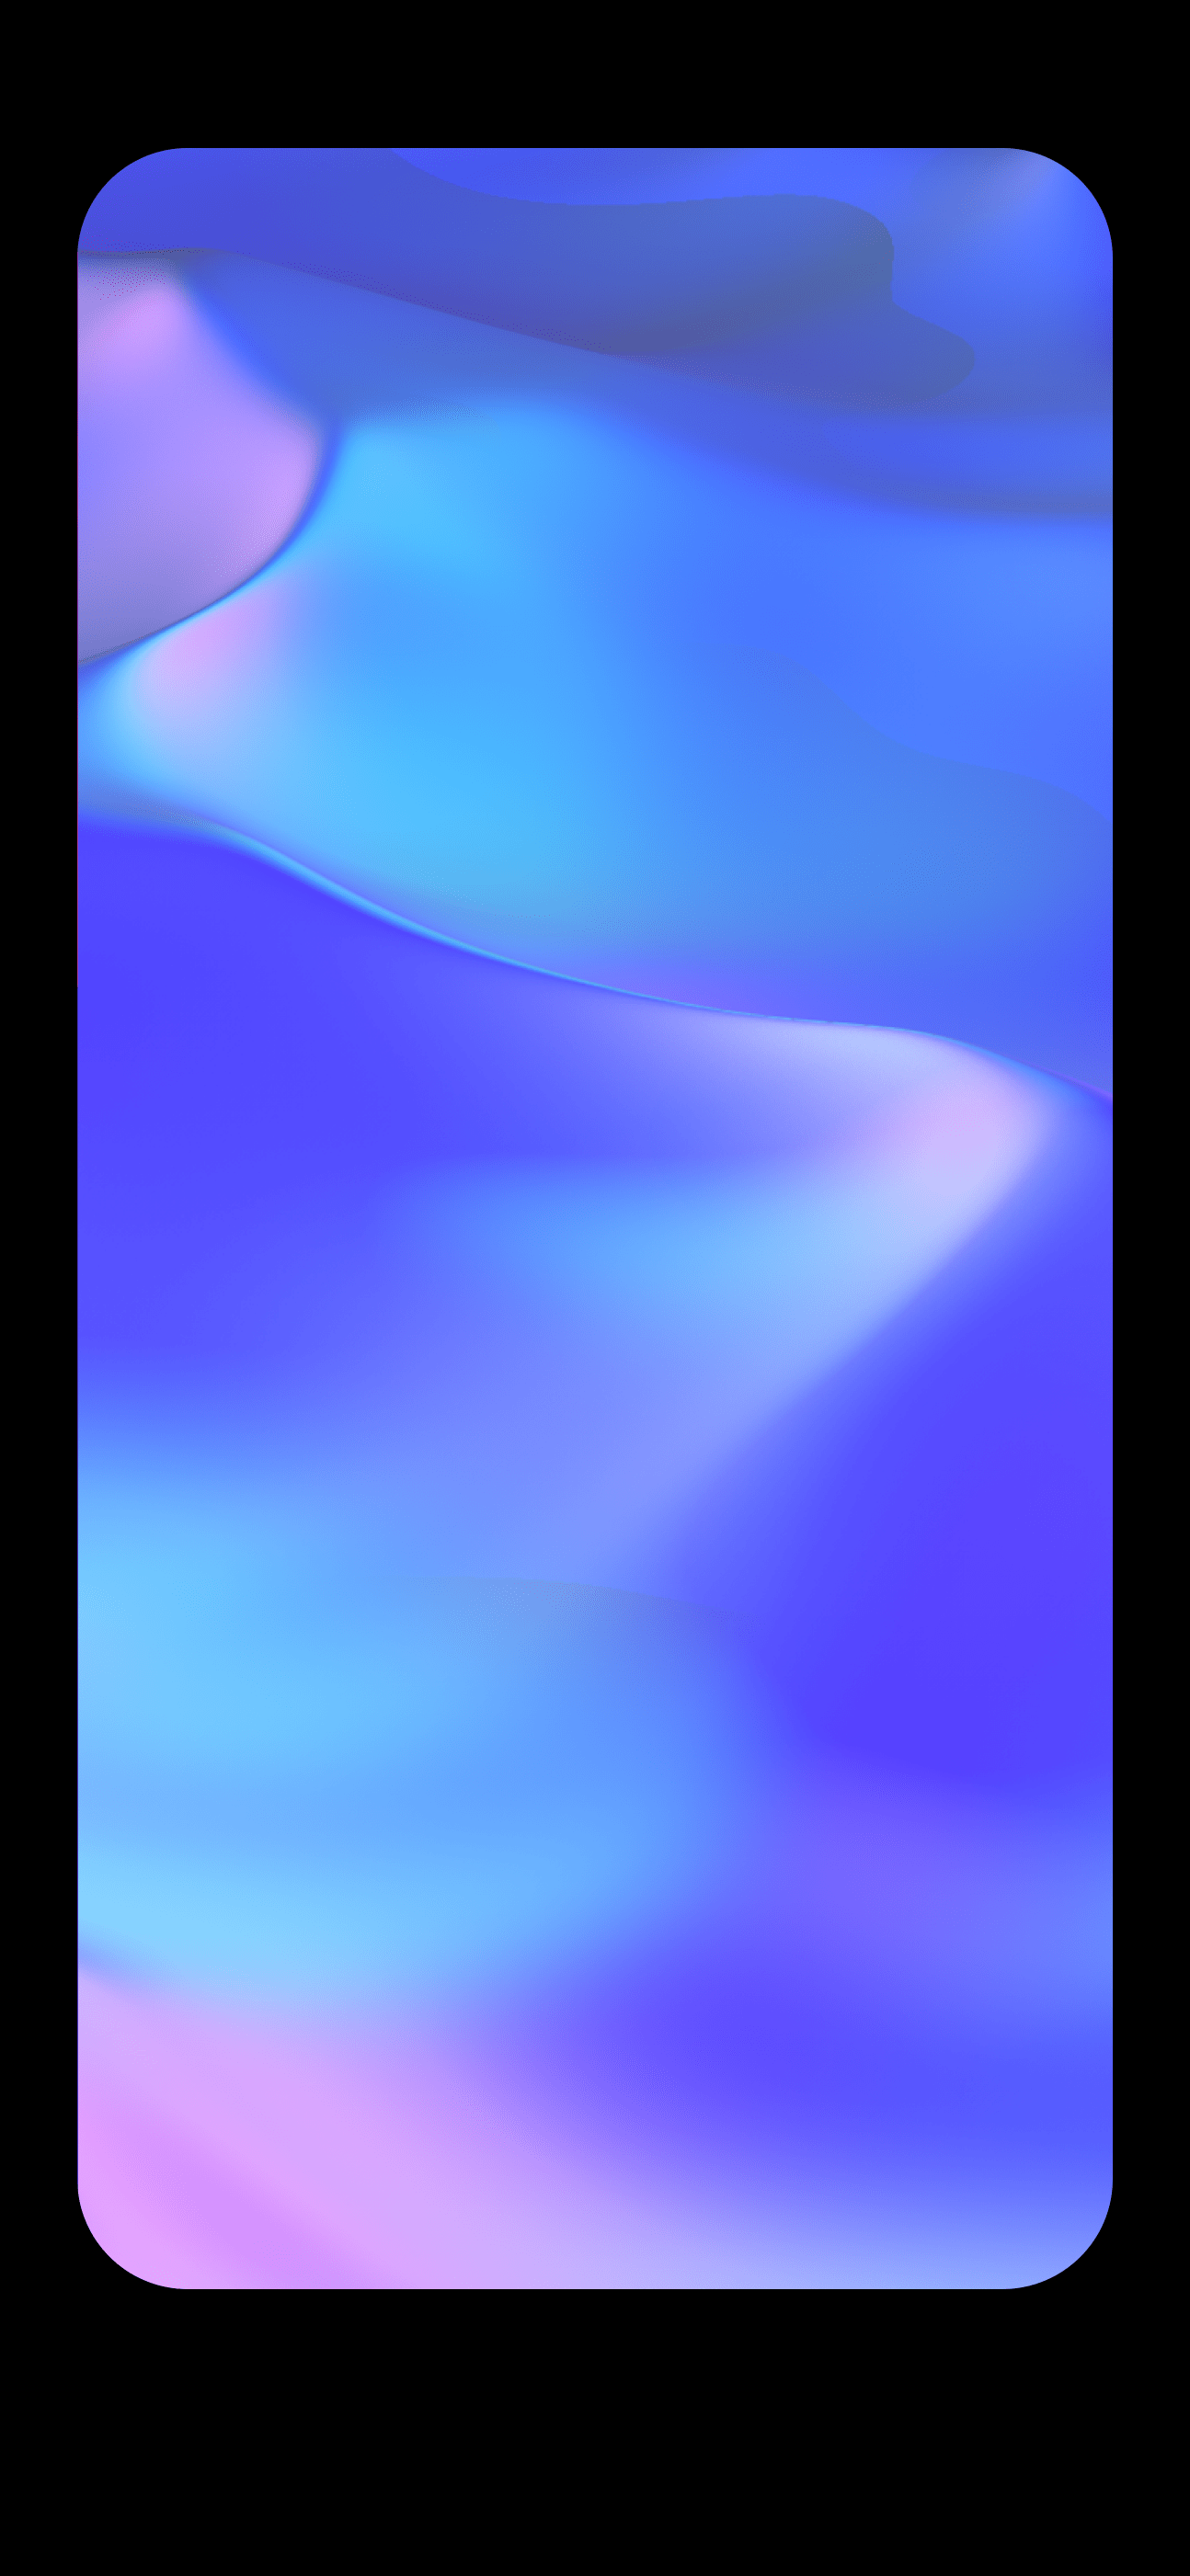 Important note to get the full notchhiding effect you need to set your  wallpaper as Still not Perspective and then adjust it until the black  bar is fully underneath the notch It